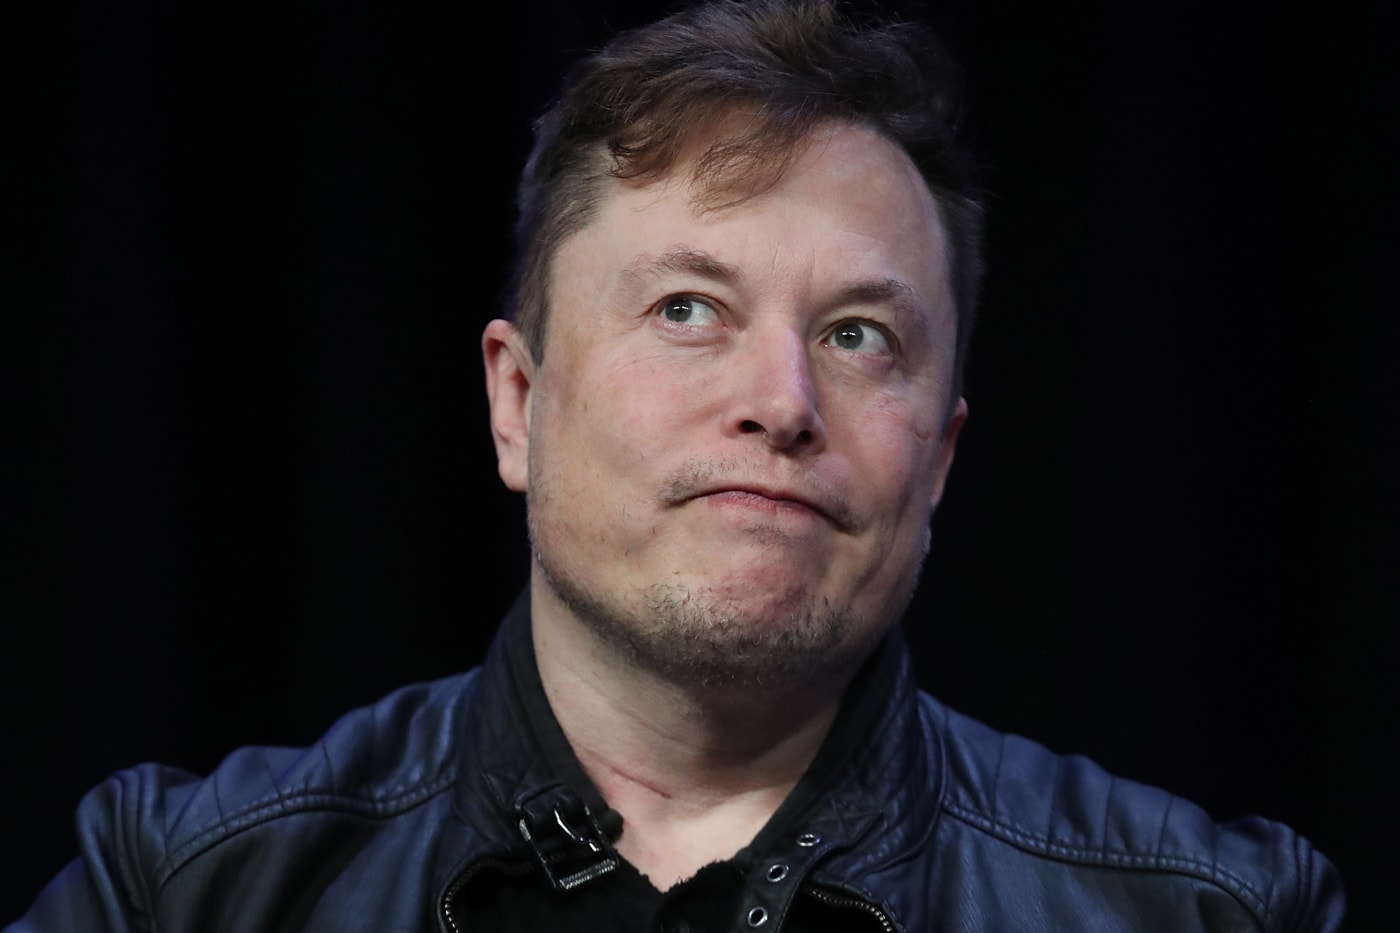 Twitter Is Now Only Worth One-Third of the Price Elon Musk and Investors Paid for It in 2022 europe ban eu disinformation tech billionaire spacex tesla ceo